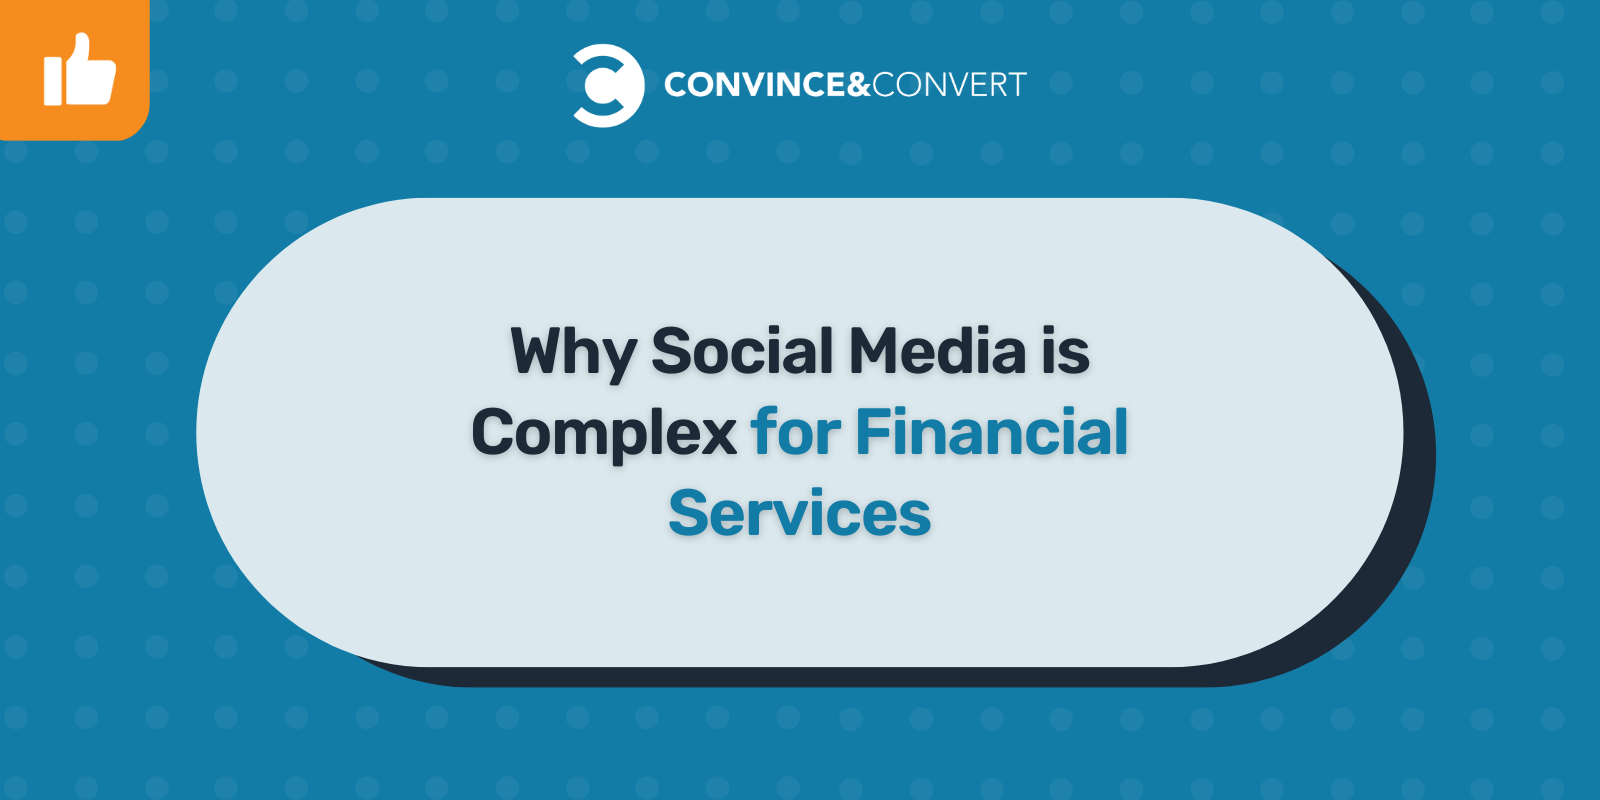 Why Social Media is Complex for Financial Services